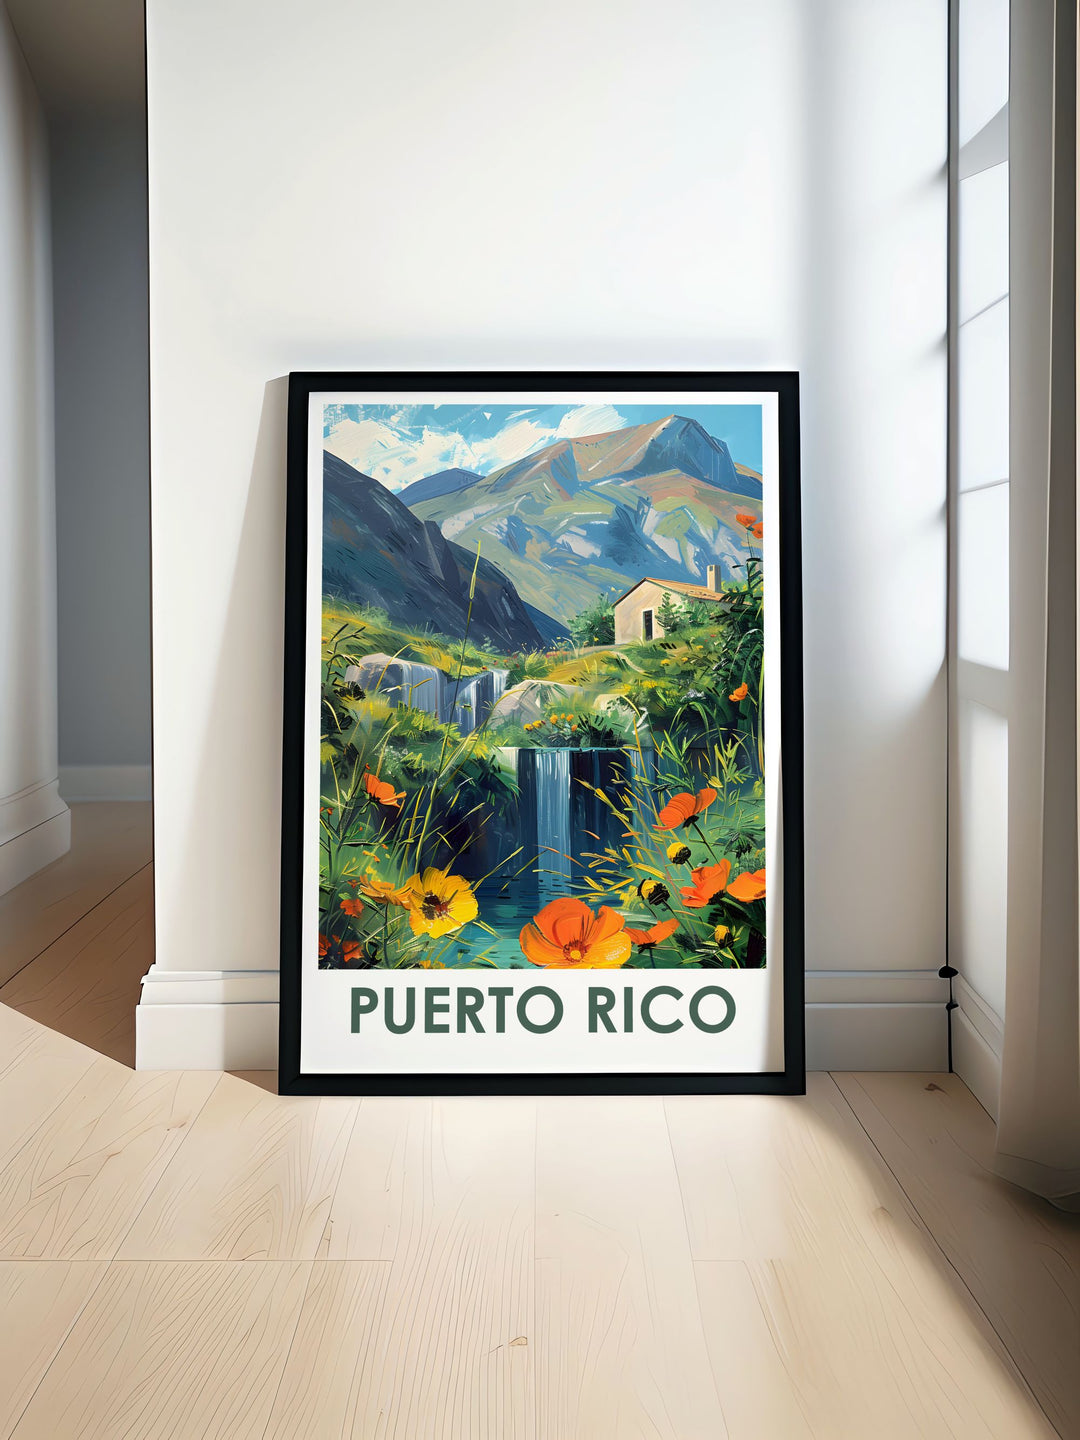 Puerto Rico Poster featuring Arecibo Cityscape and El Yunque National Forest. This travel poster print captures the vibrant colors and intricate details of Arecibo and El Yunque, making it a perfect addition to any home decor and a thoughtful personalized gift.